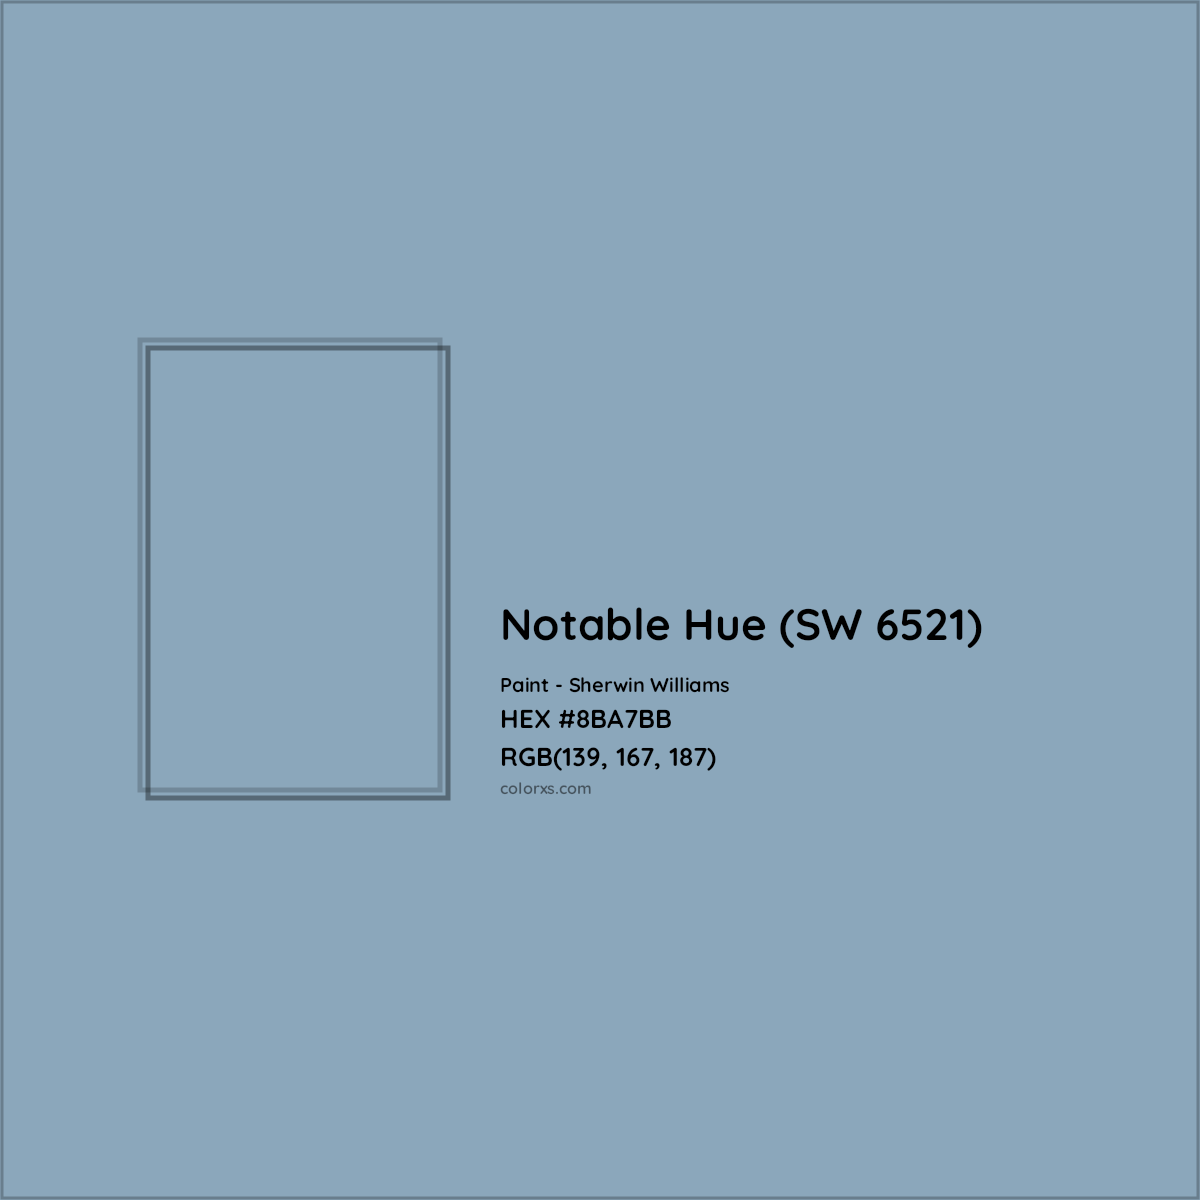 HEX #8BA7BB Notable Hue (SW 6521) Paint Sherwin Williams - Color Code